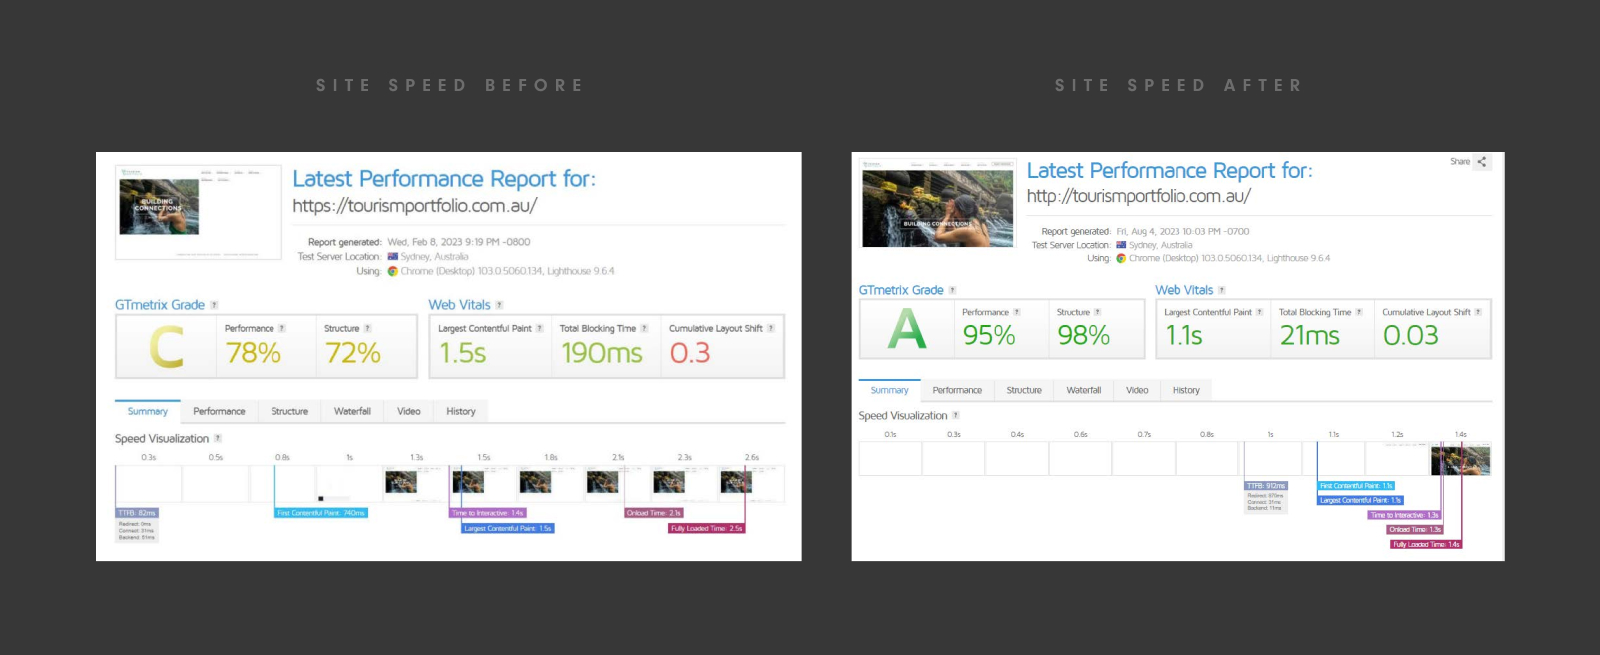 Comparison of website performance reports before (left) and after (right) optimization. The "before" report shows a grade C with slower load times, while the "after" report shows a grade A with faster load times.